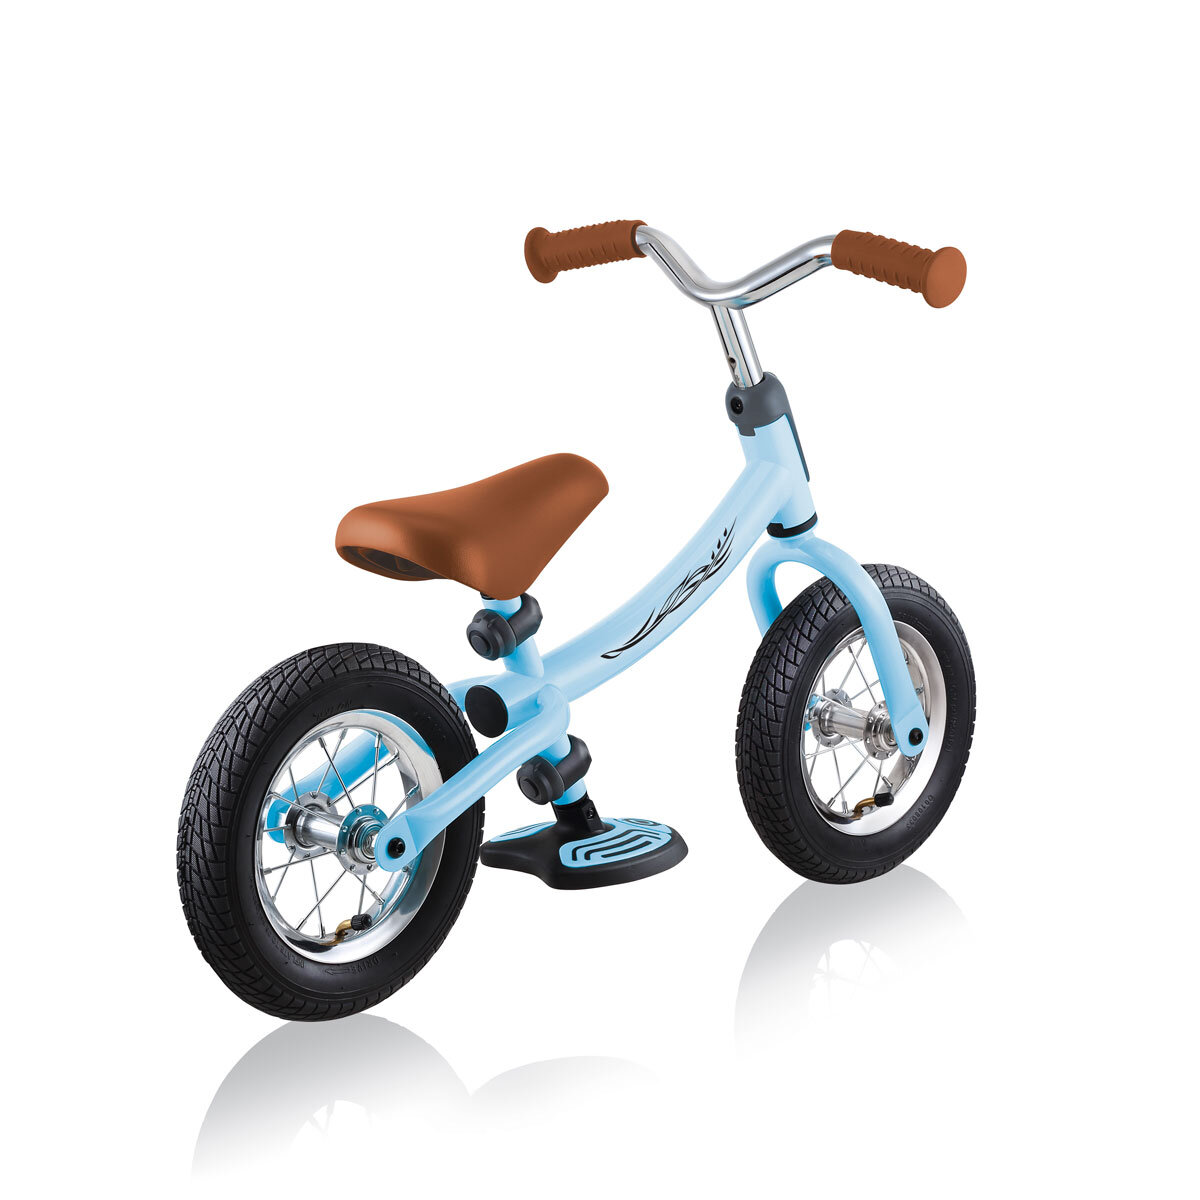 Buy Globber Go Bike Air Pastel Blue Overview2 Image at Costco.co.uk